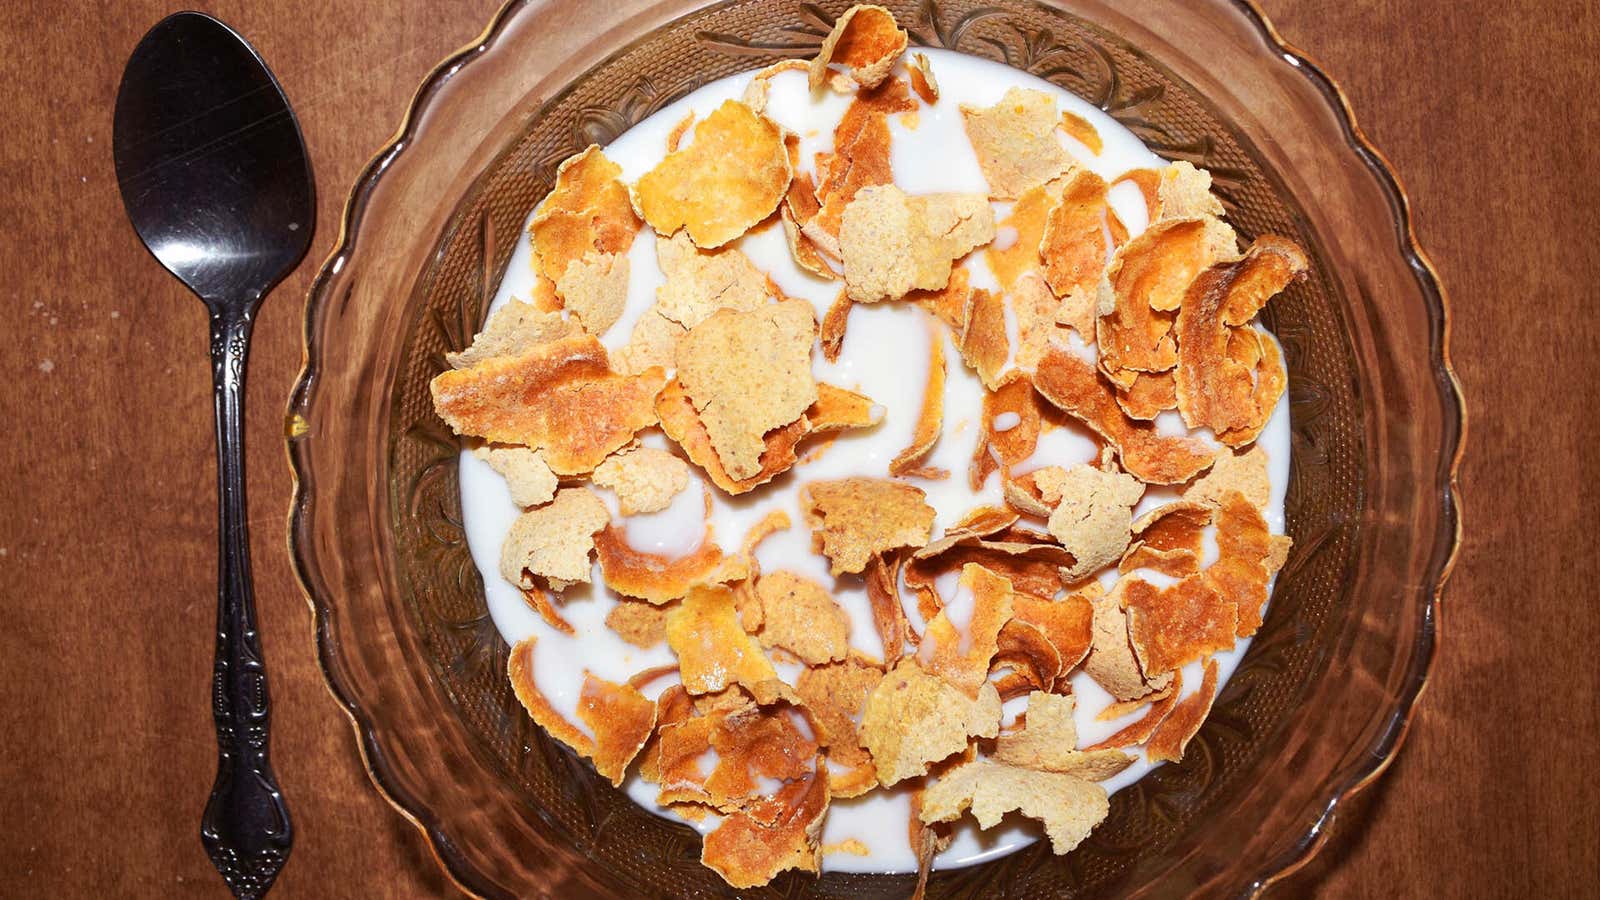 My quest to make the perfect bowl of cornflakes